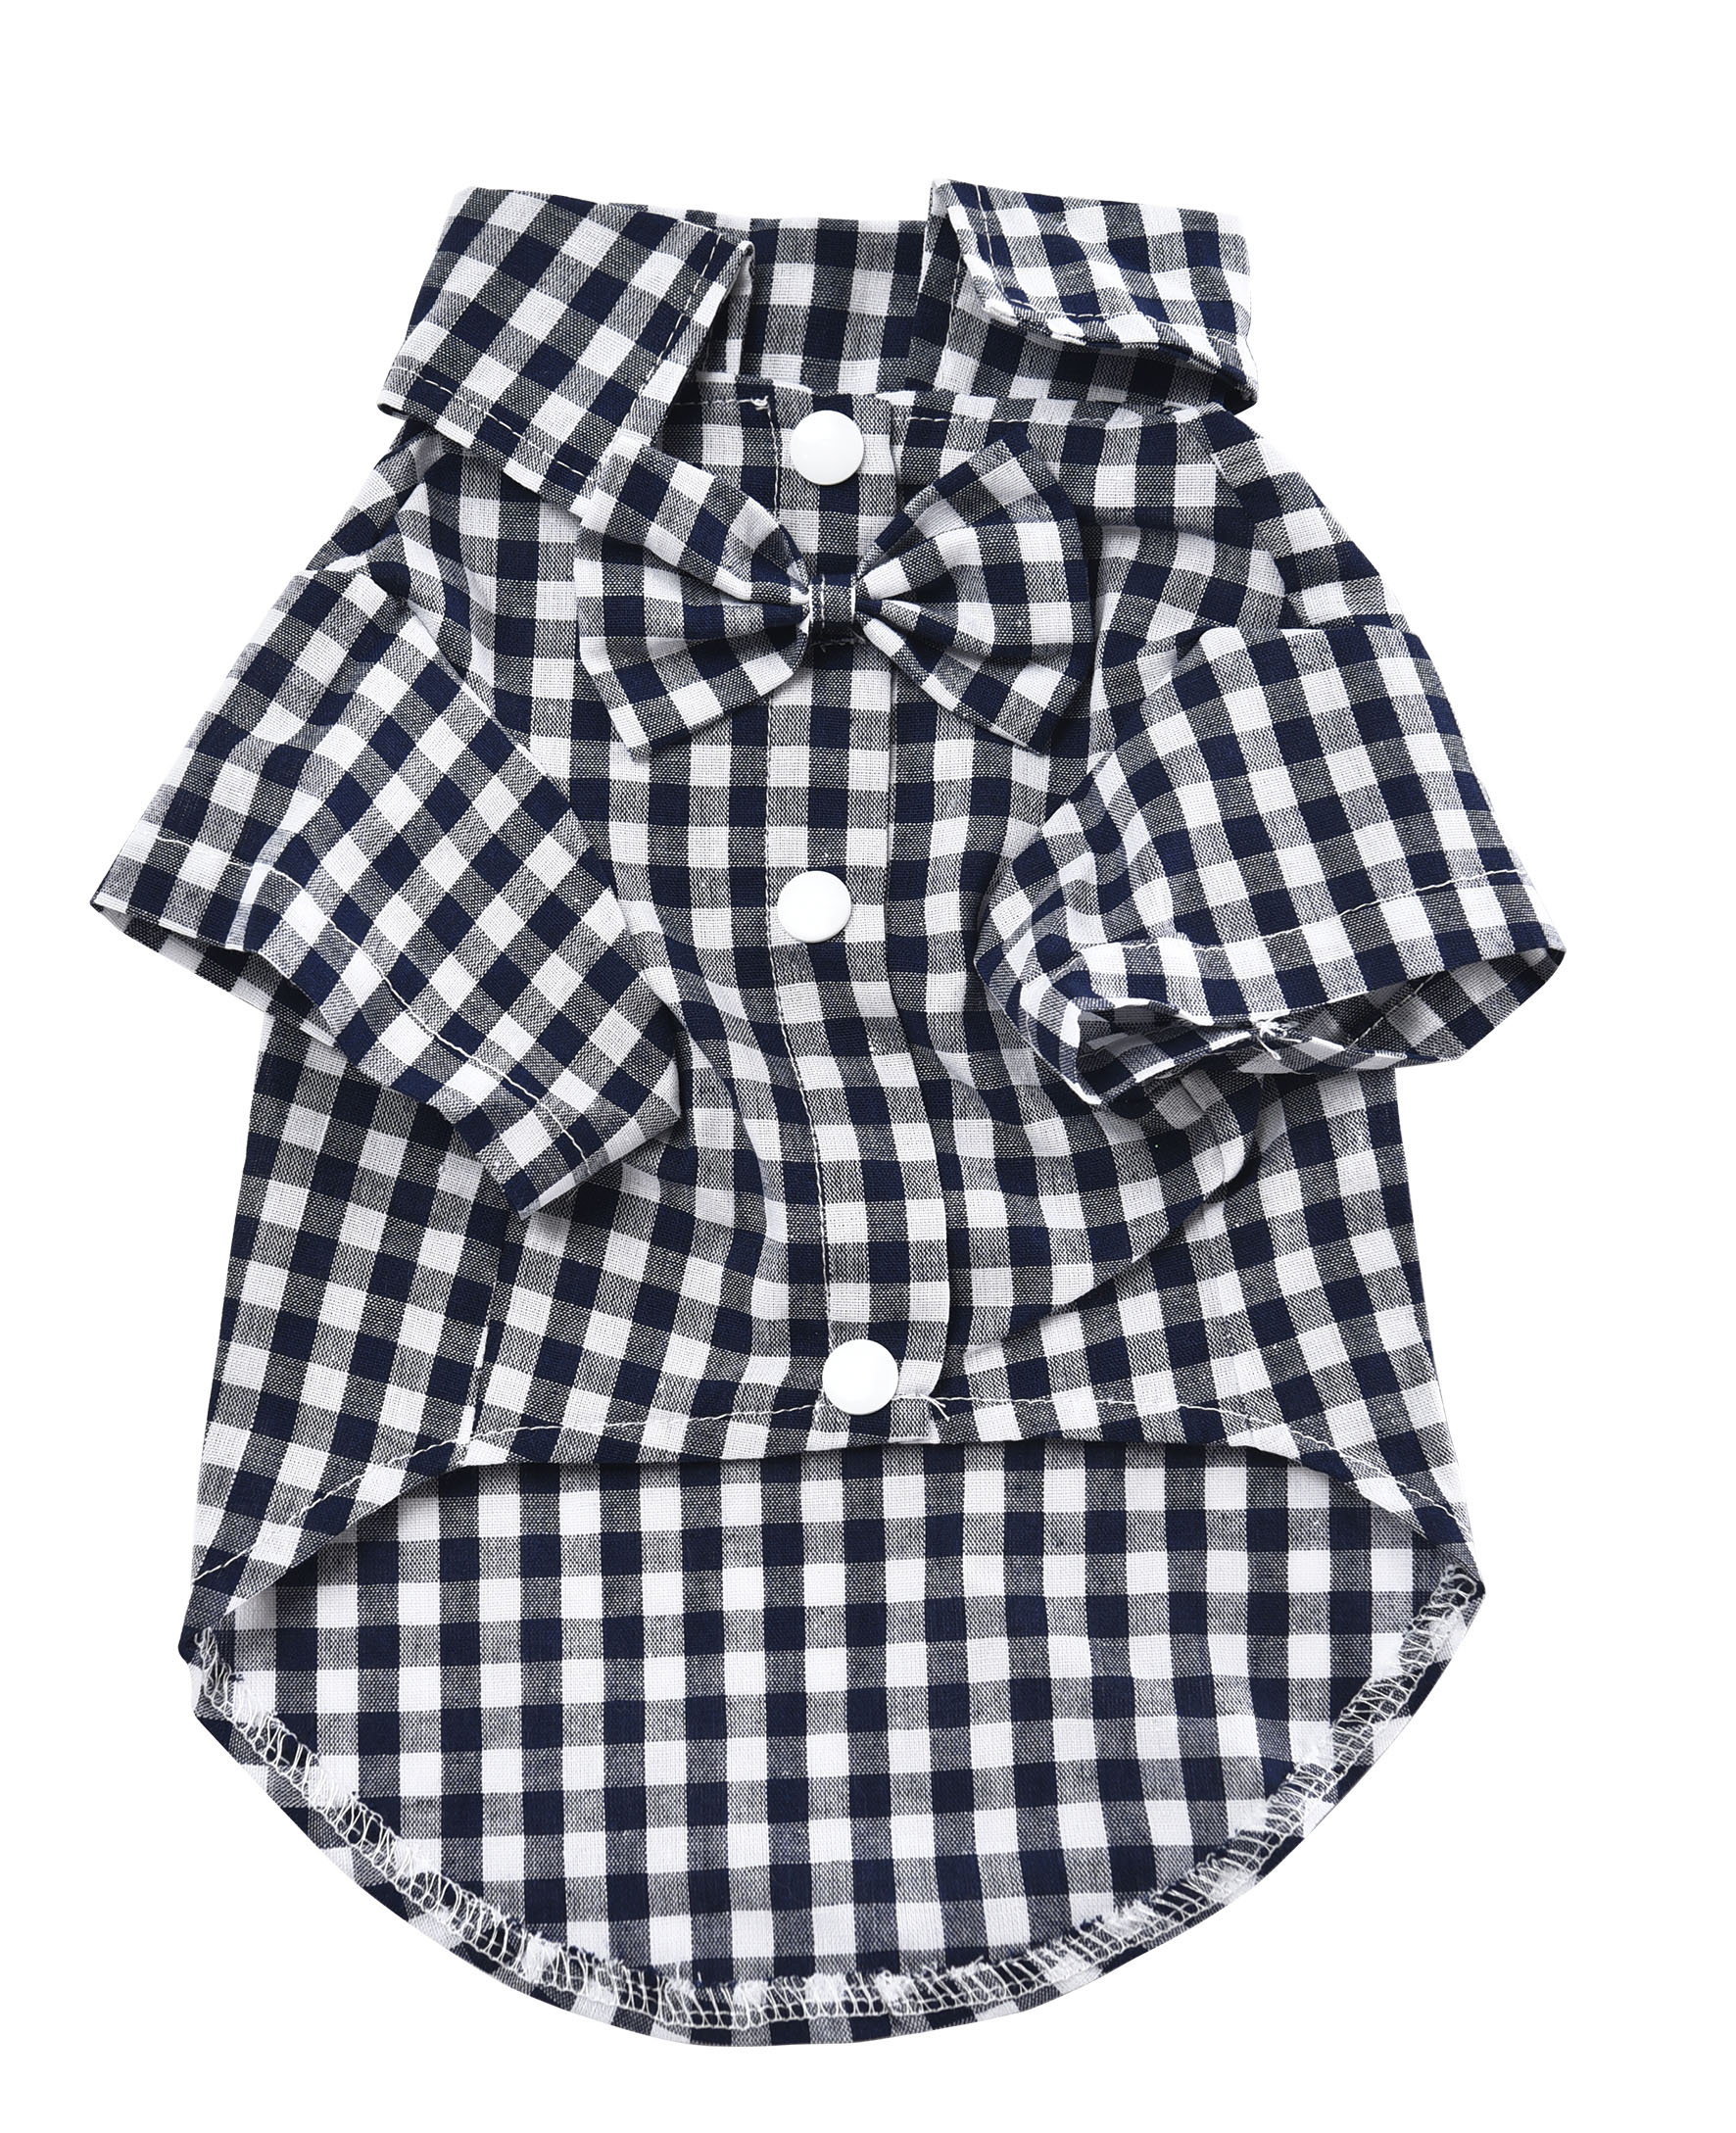 Cute And Stylish Gridding Summer Shirt for Small Dogs